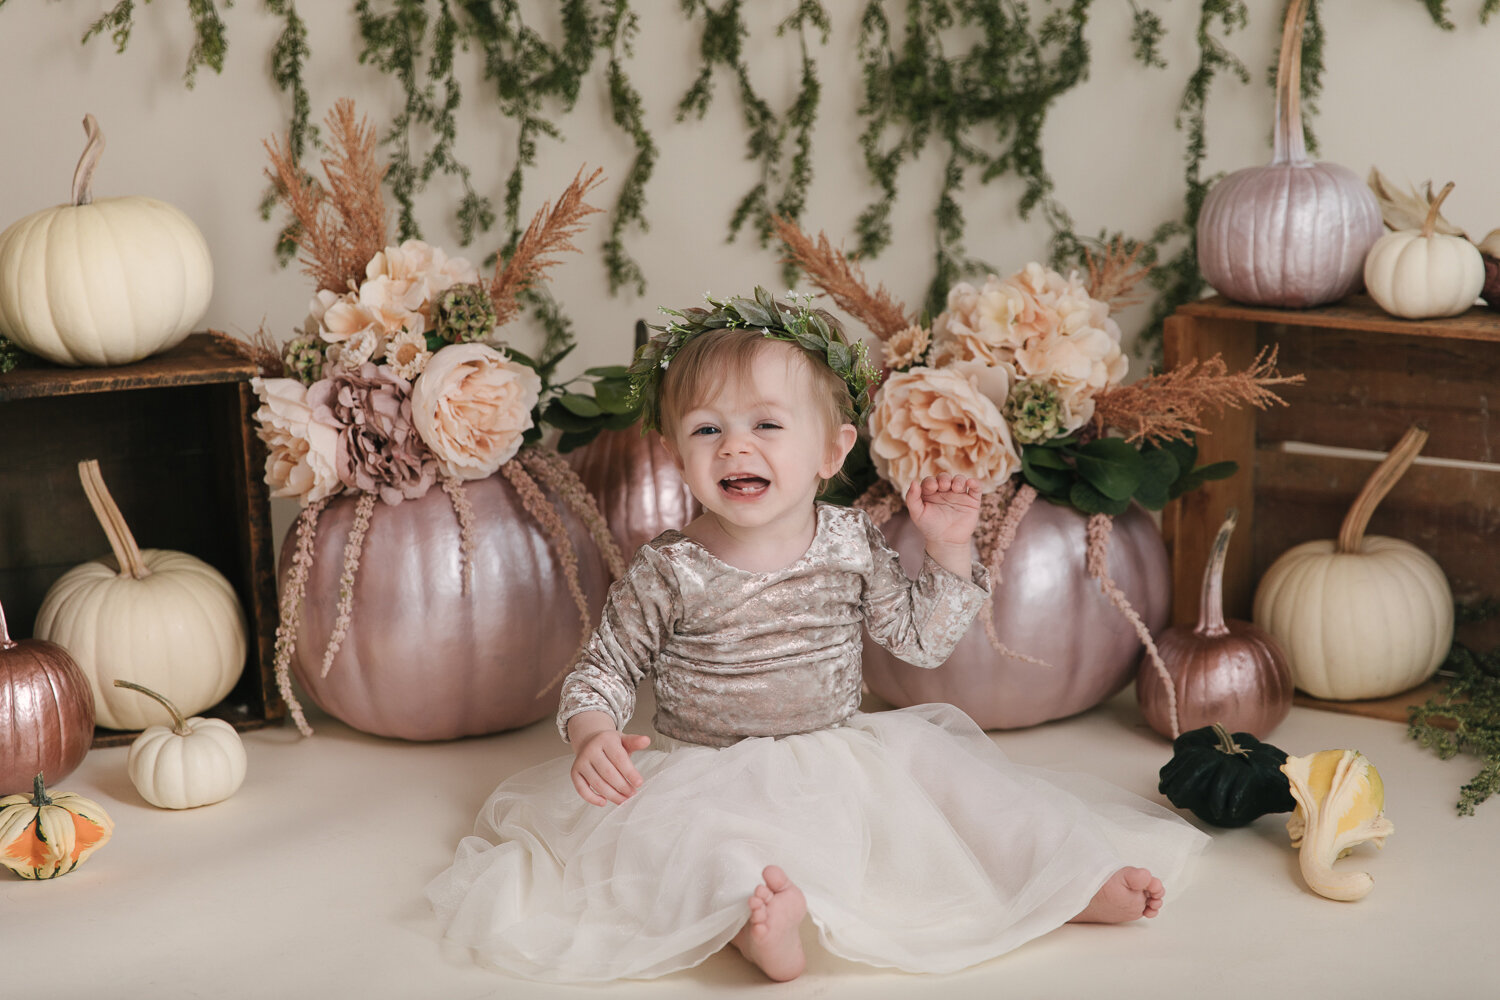 Baby_Girl_Birthday_Session_in_Studio_Smash_and_Splash_Photos_Pink_and_Cream_Little_Pumpkin_Theme_Baby_Girl_Frist_Birthday_Shoot_October_and_Fall_Soft_Color_Pallet_by_Baby_Photographer_Christie_Leigh_Photo_in_Cortland_Ohio-1.JPG